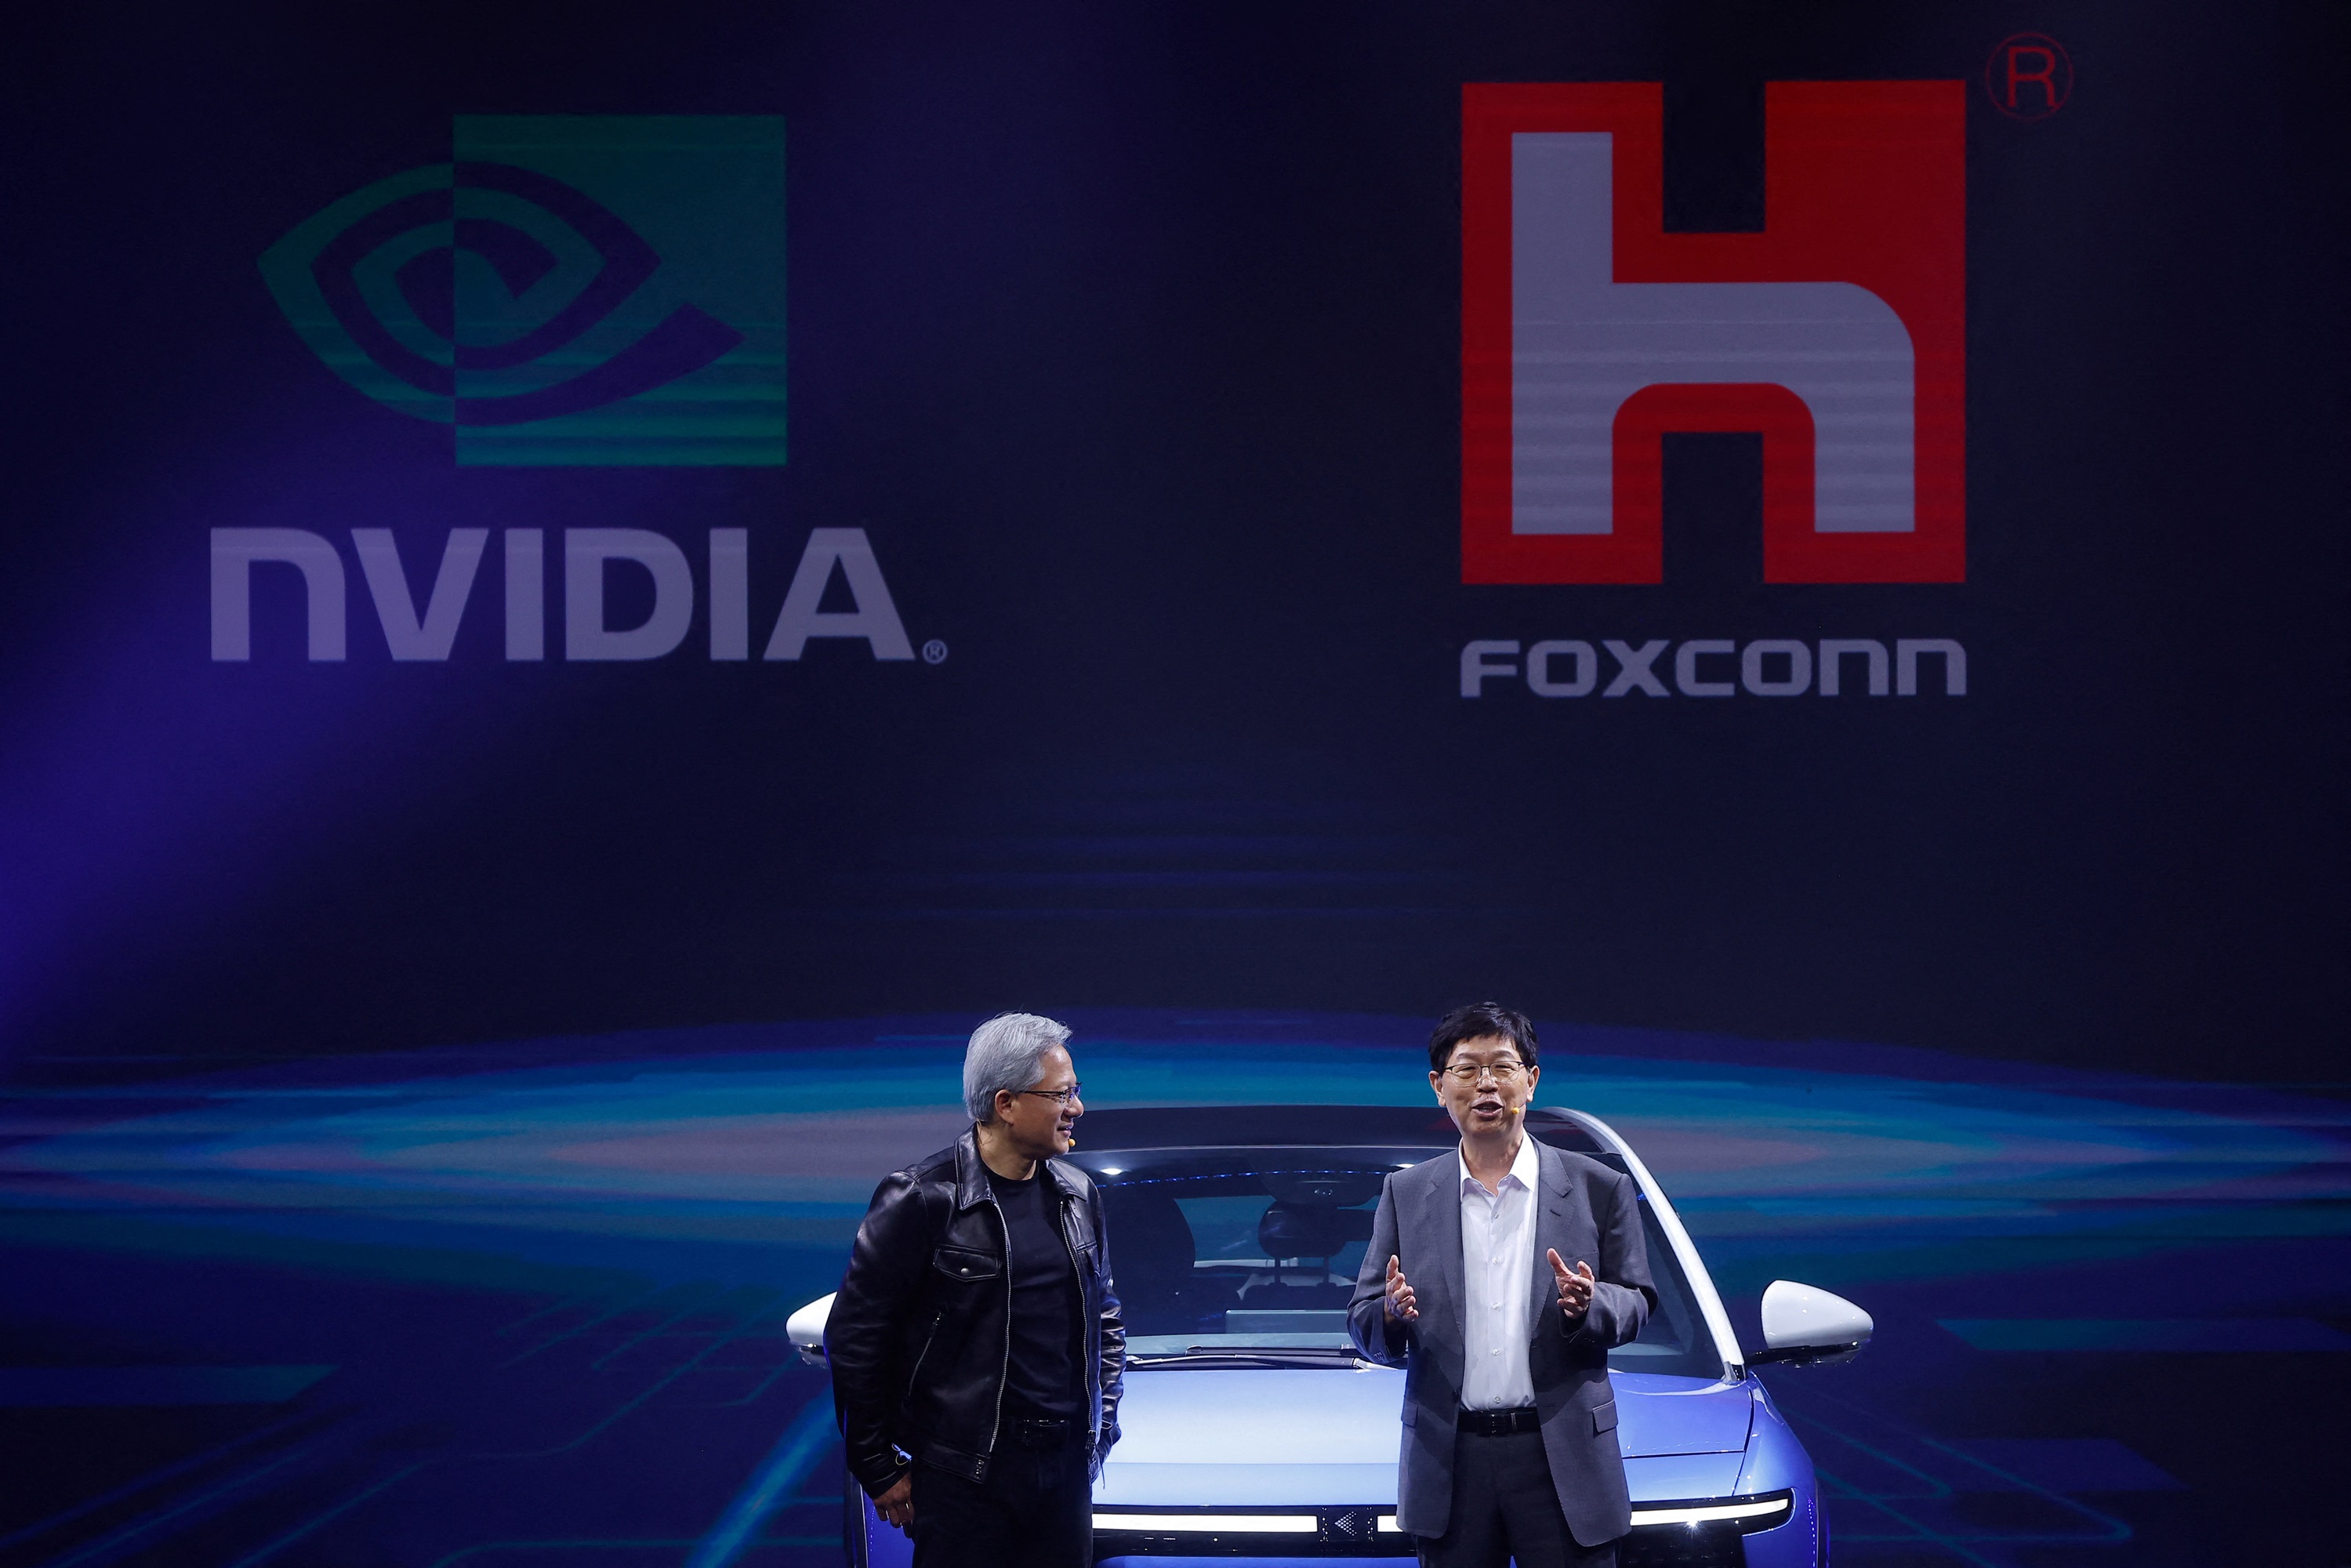 Foxconn and Nvidia announced the creation of "artificial intelligence factories"